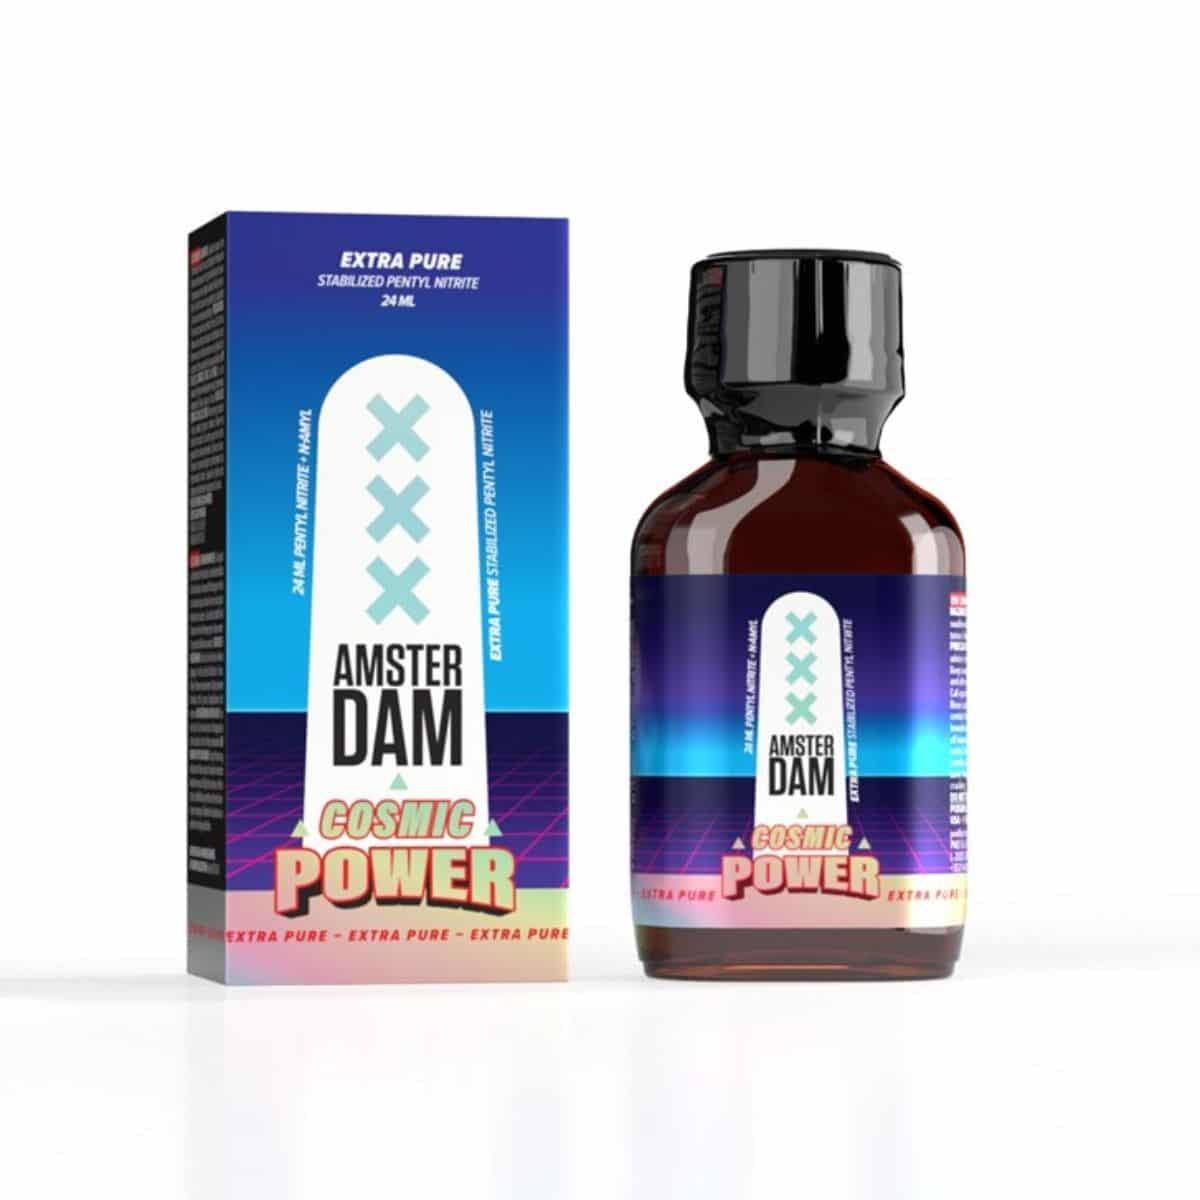 A small amber glass bottle with a dropper next to its vibrant blue and purple product box labeled 'Amsterdam Cosmic Power Pentyl' – suggesting a high-potency formula.